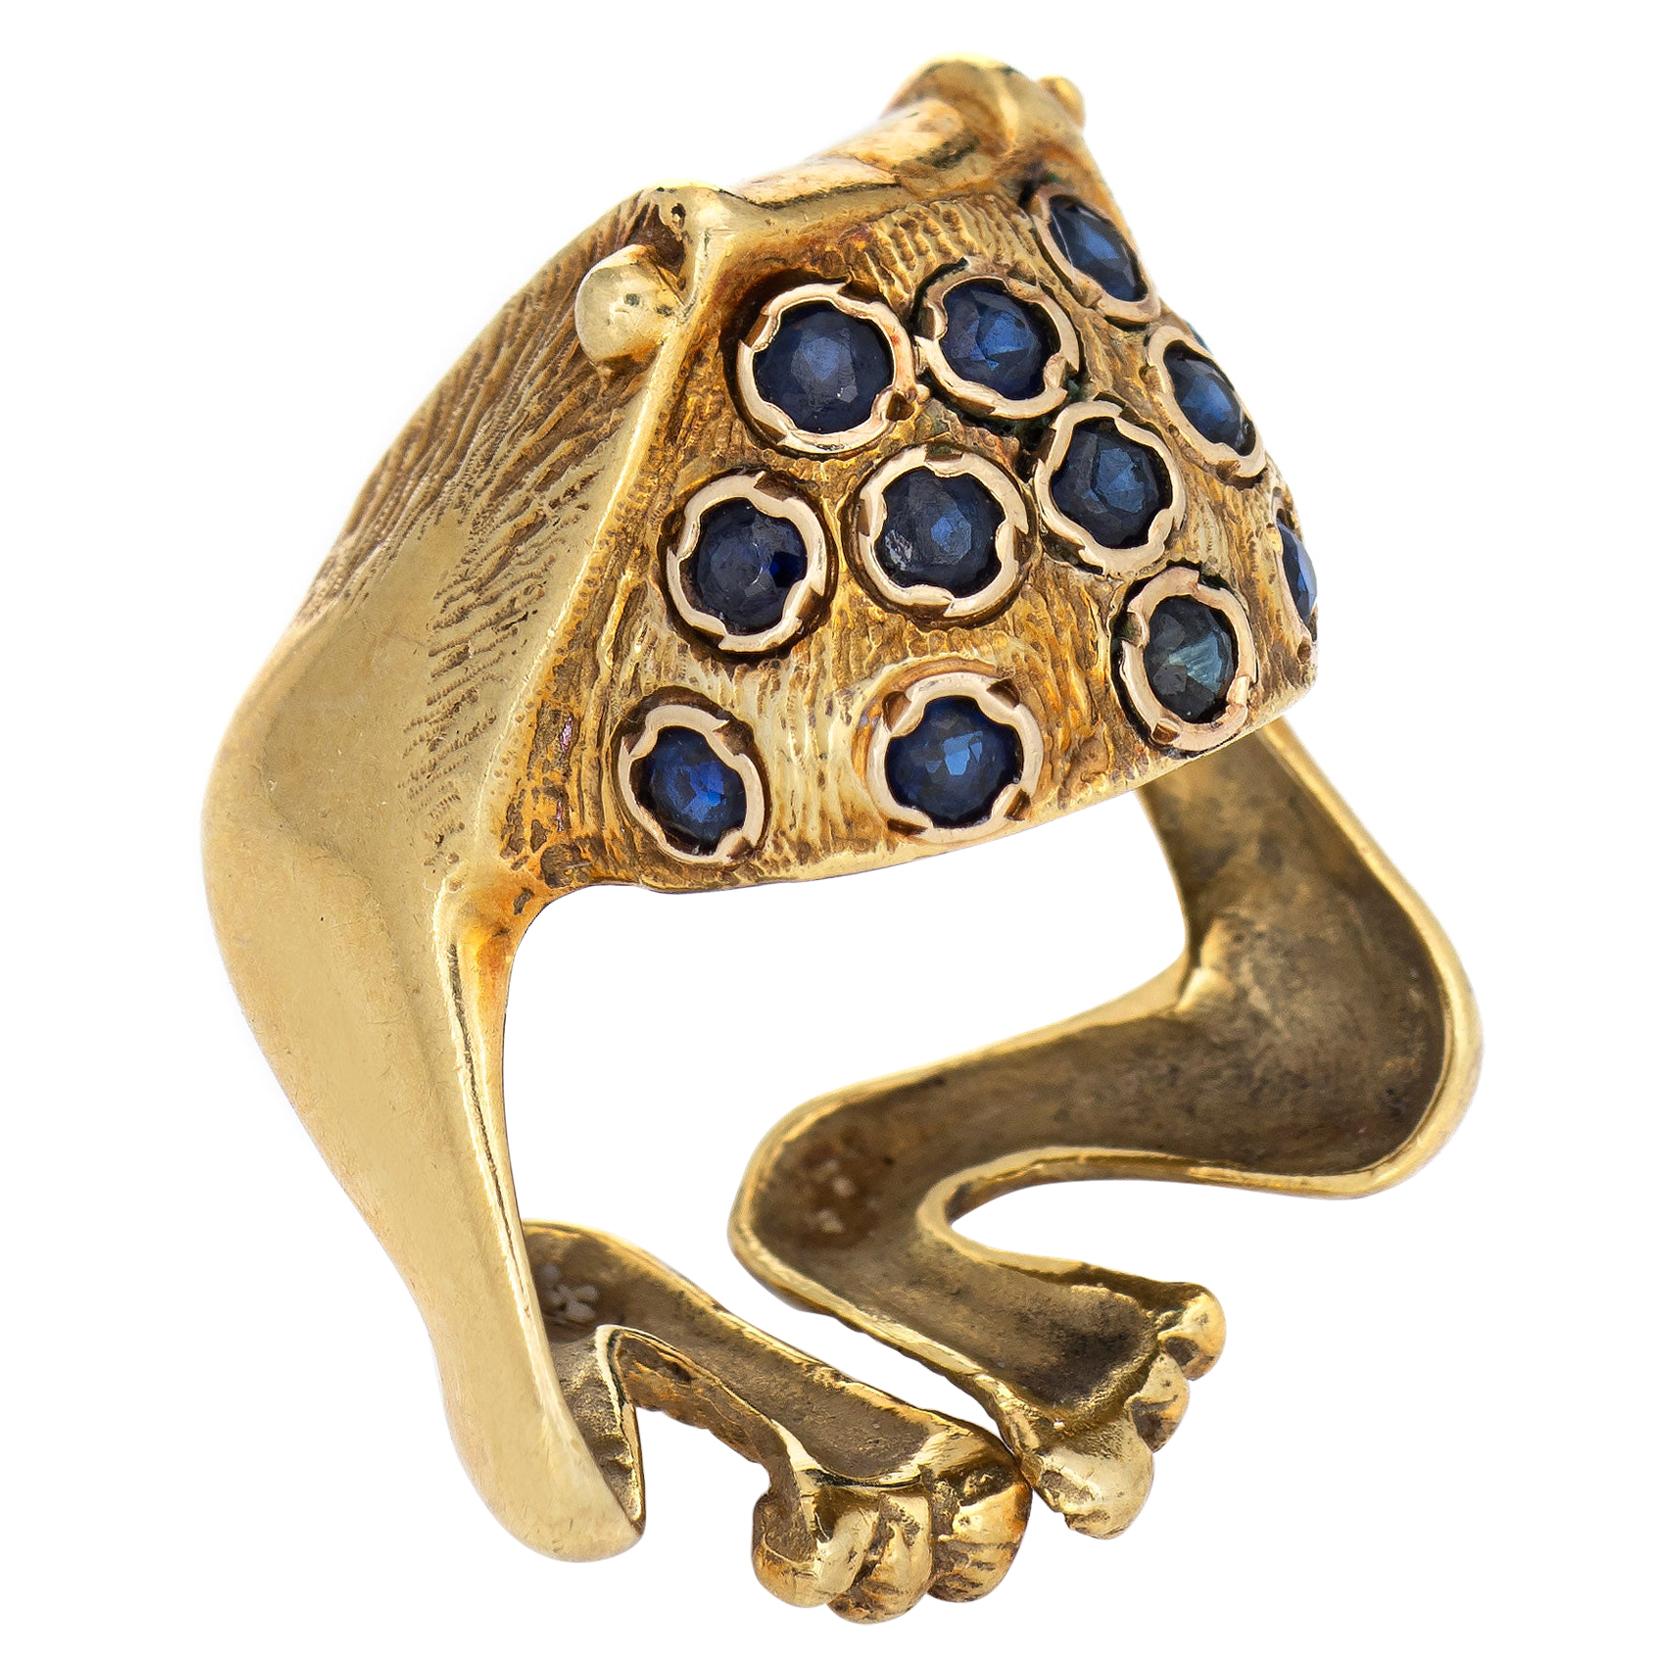 Vintage Frog Ring 18k Yellow Gold Sapphire Estate Fine Jewelry Toad